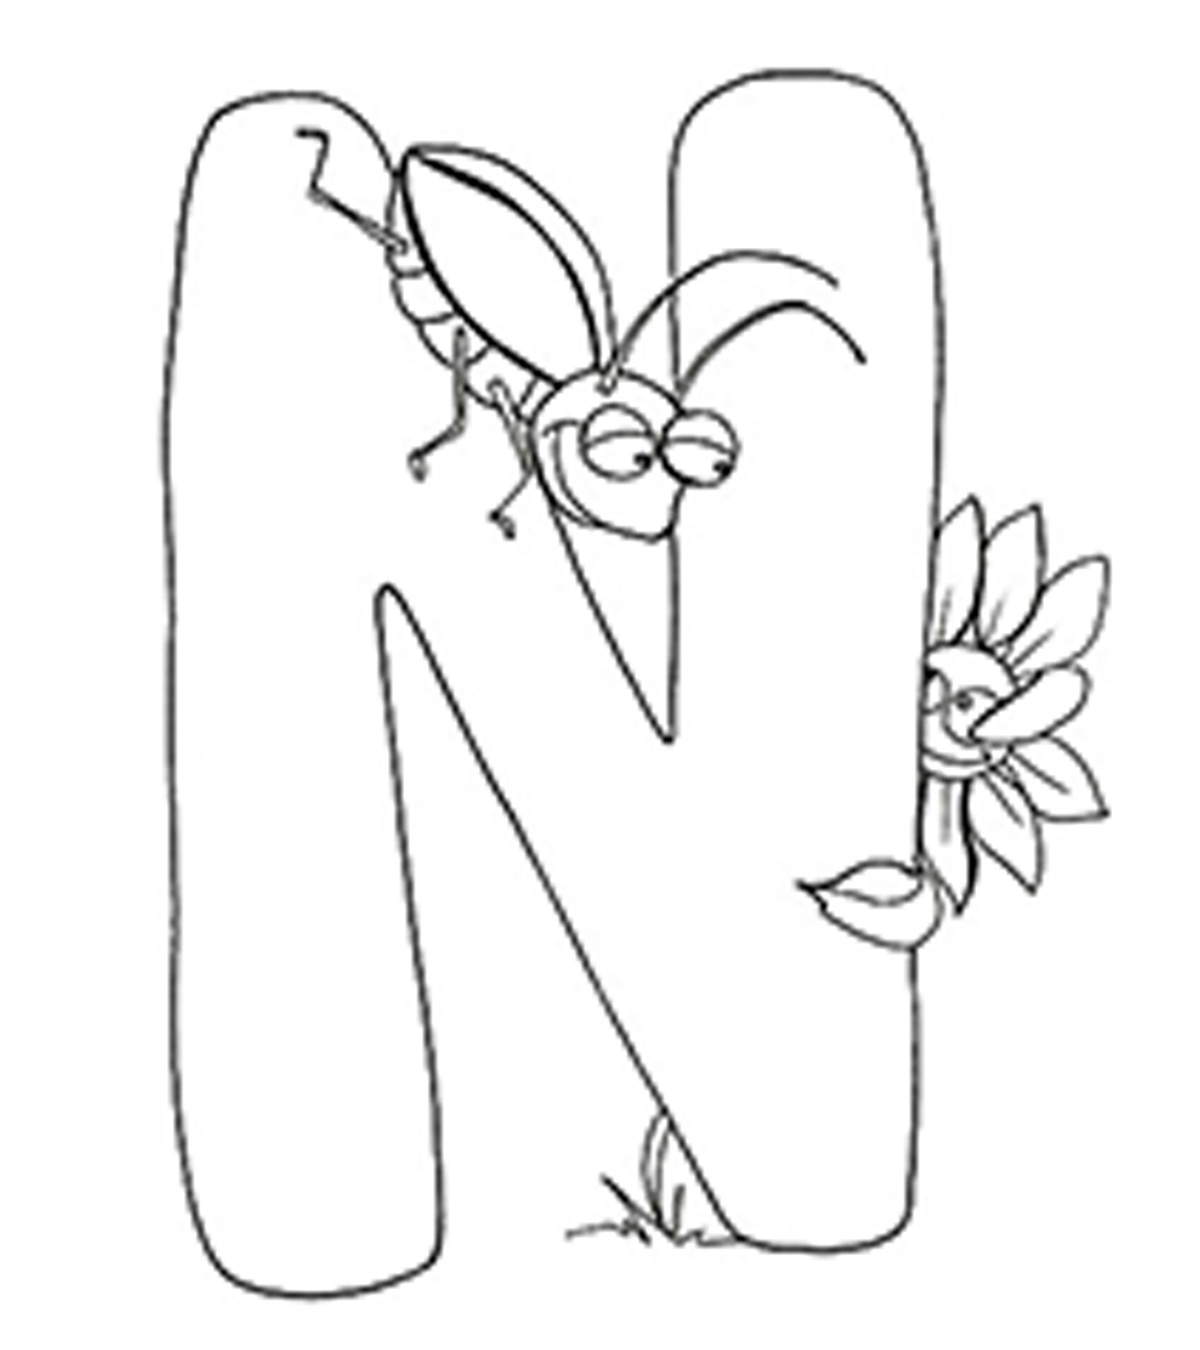 Download Eductional Coloring Pages - MomJunction